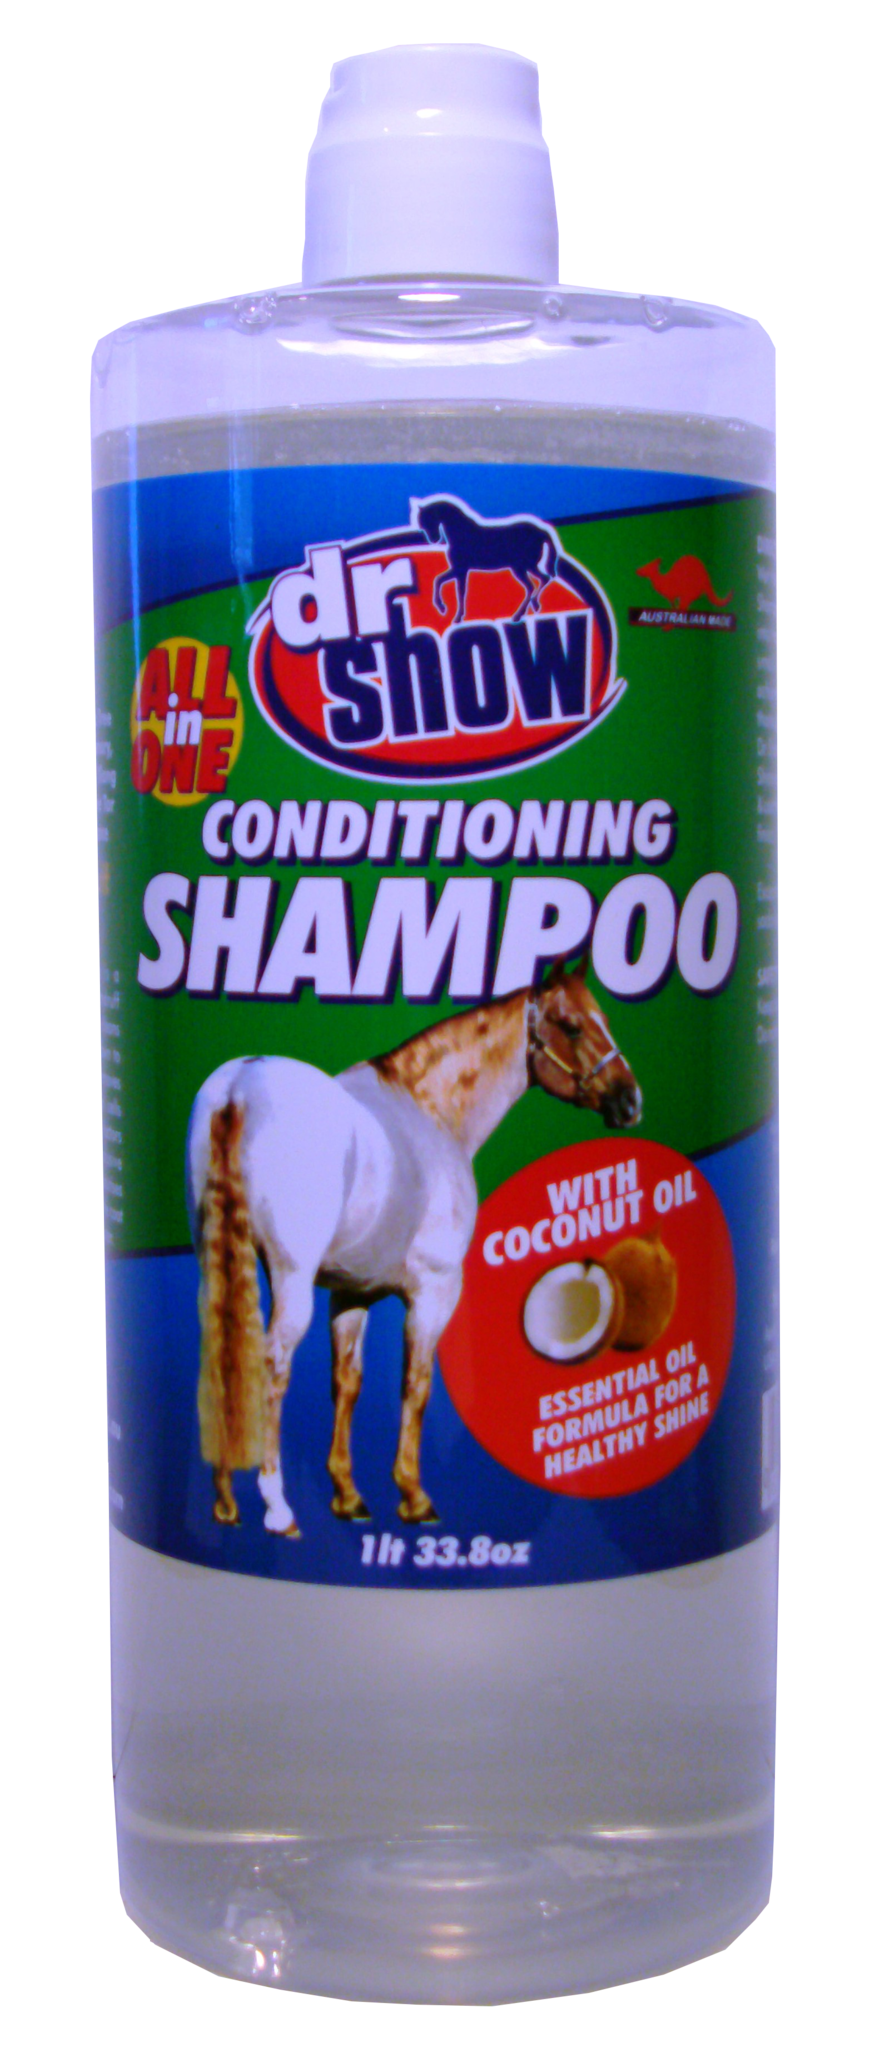 Dr Show All in One Shampoo